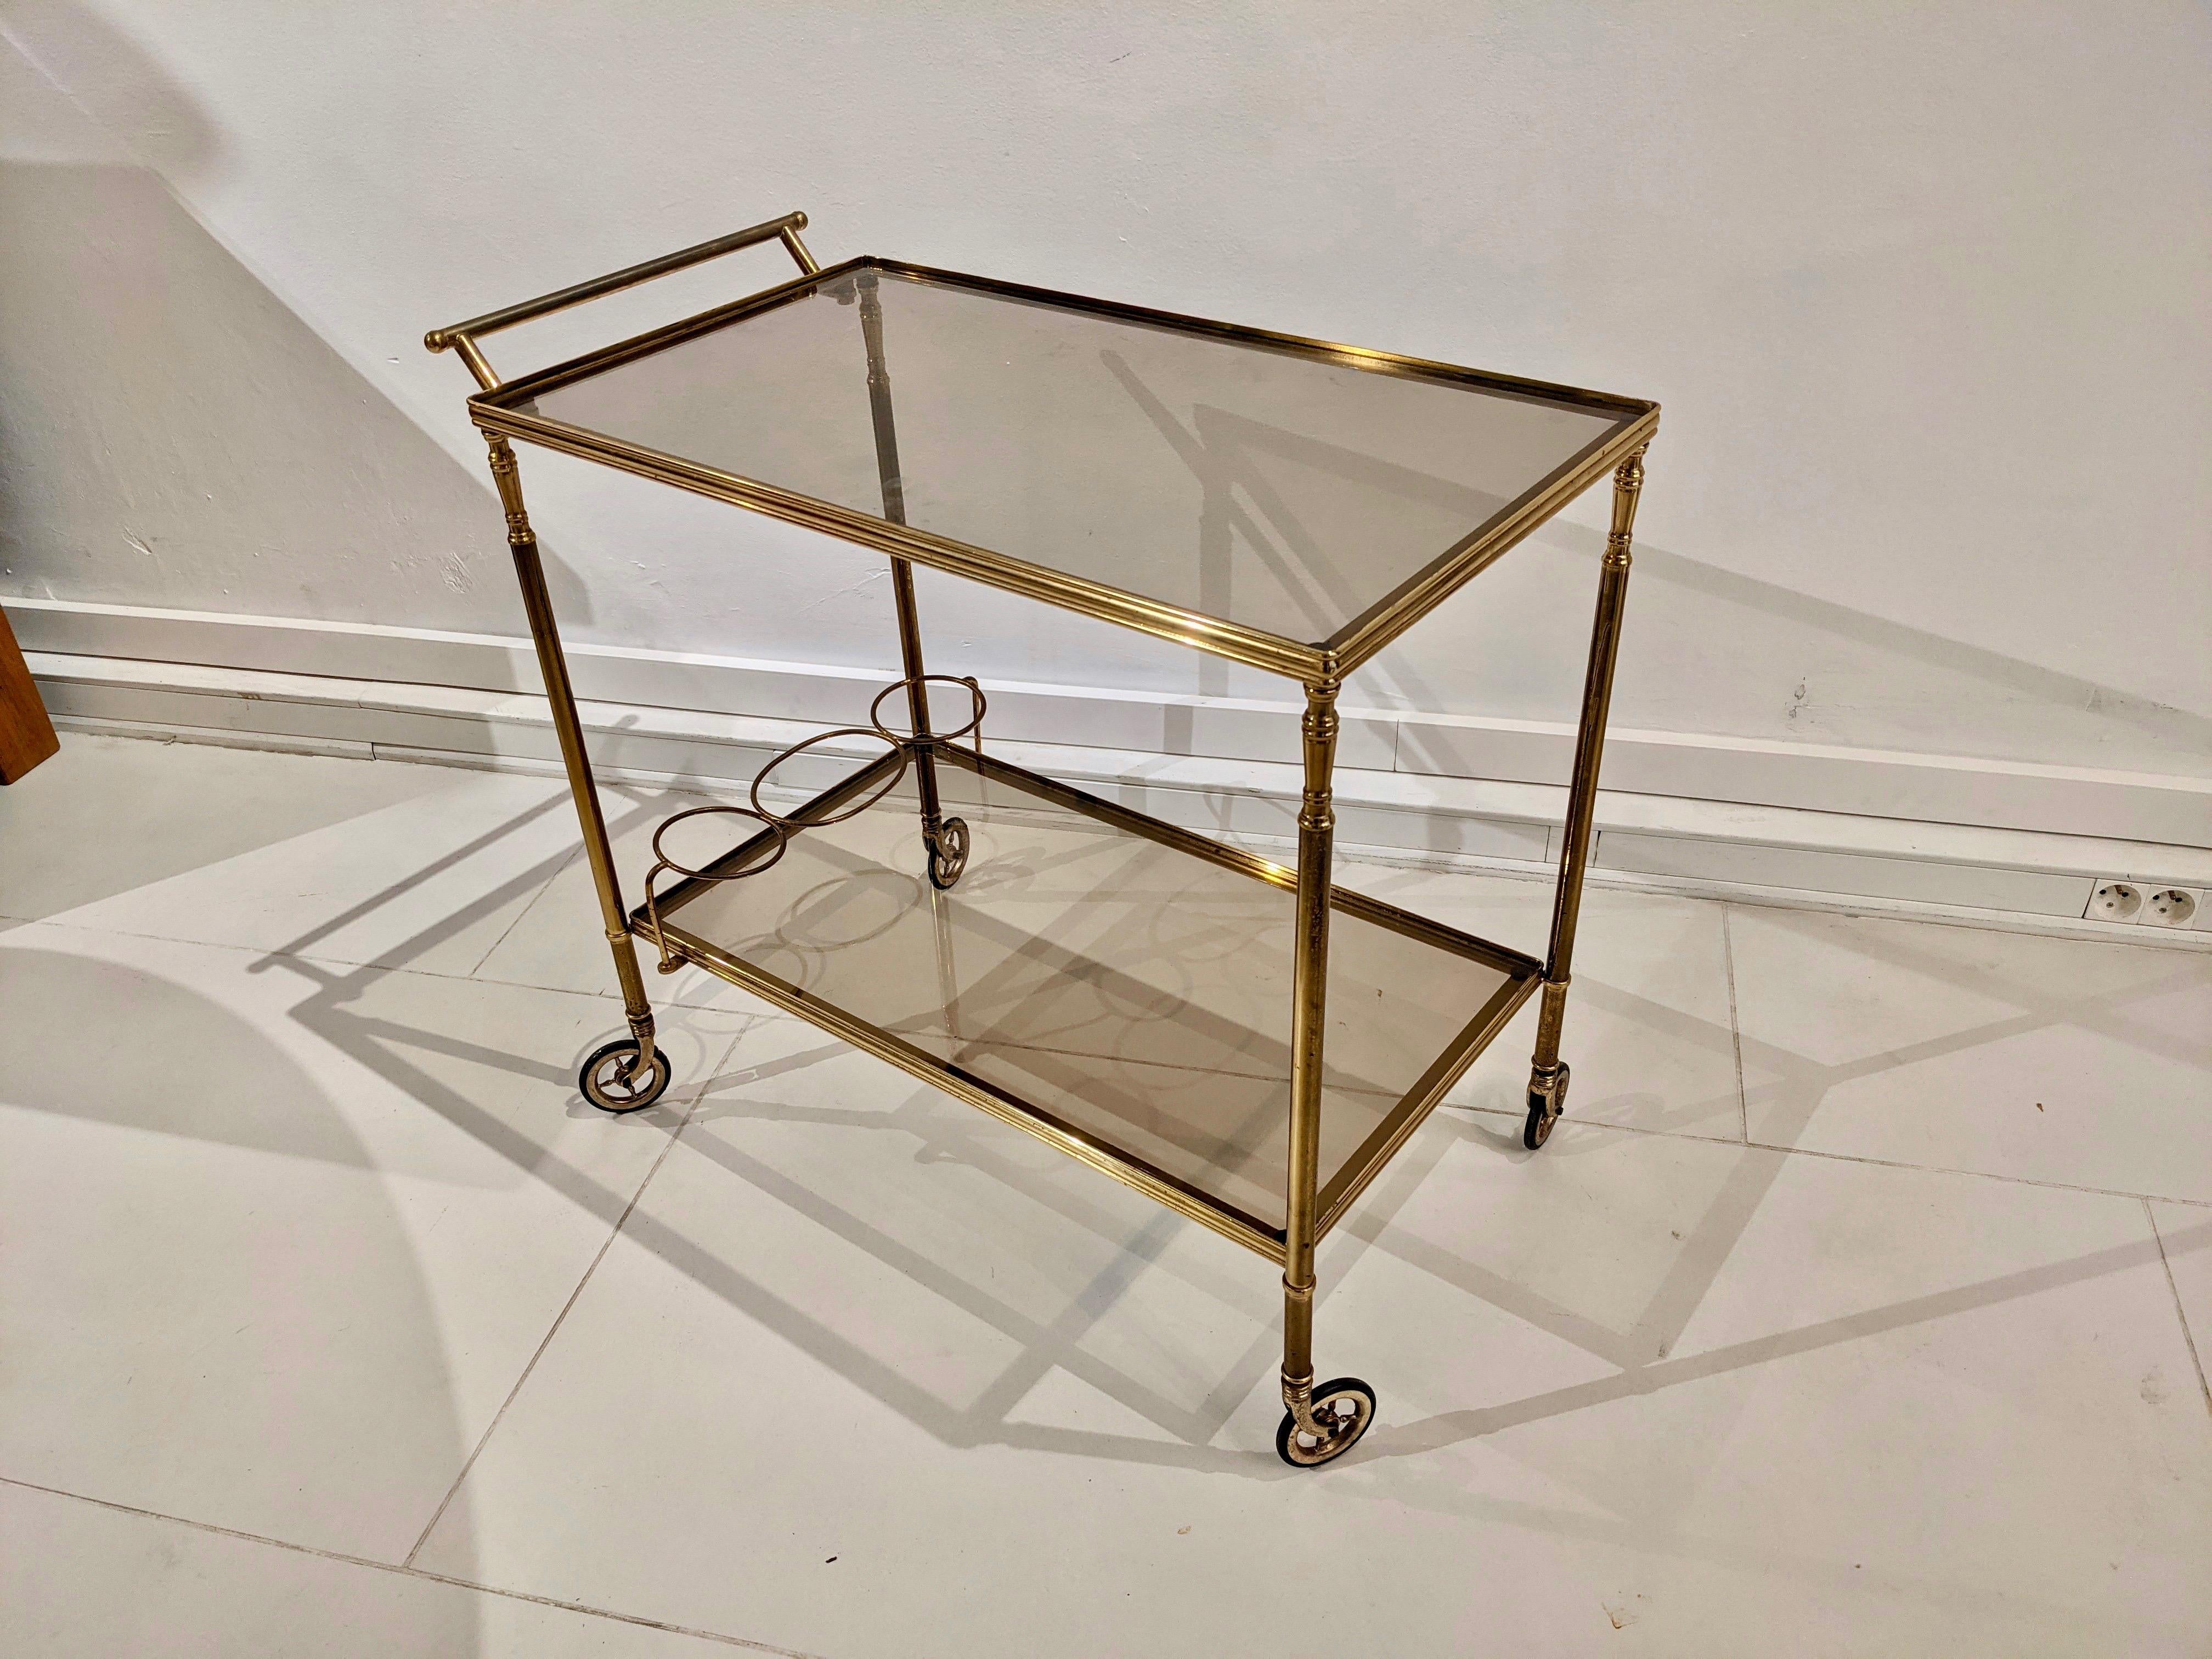 Gilded brass trolley. Glass top. Very good condition, normal wear visible in the picture.
Dimensions: H: 65 cm x D: 63cm x W: 43cm.